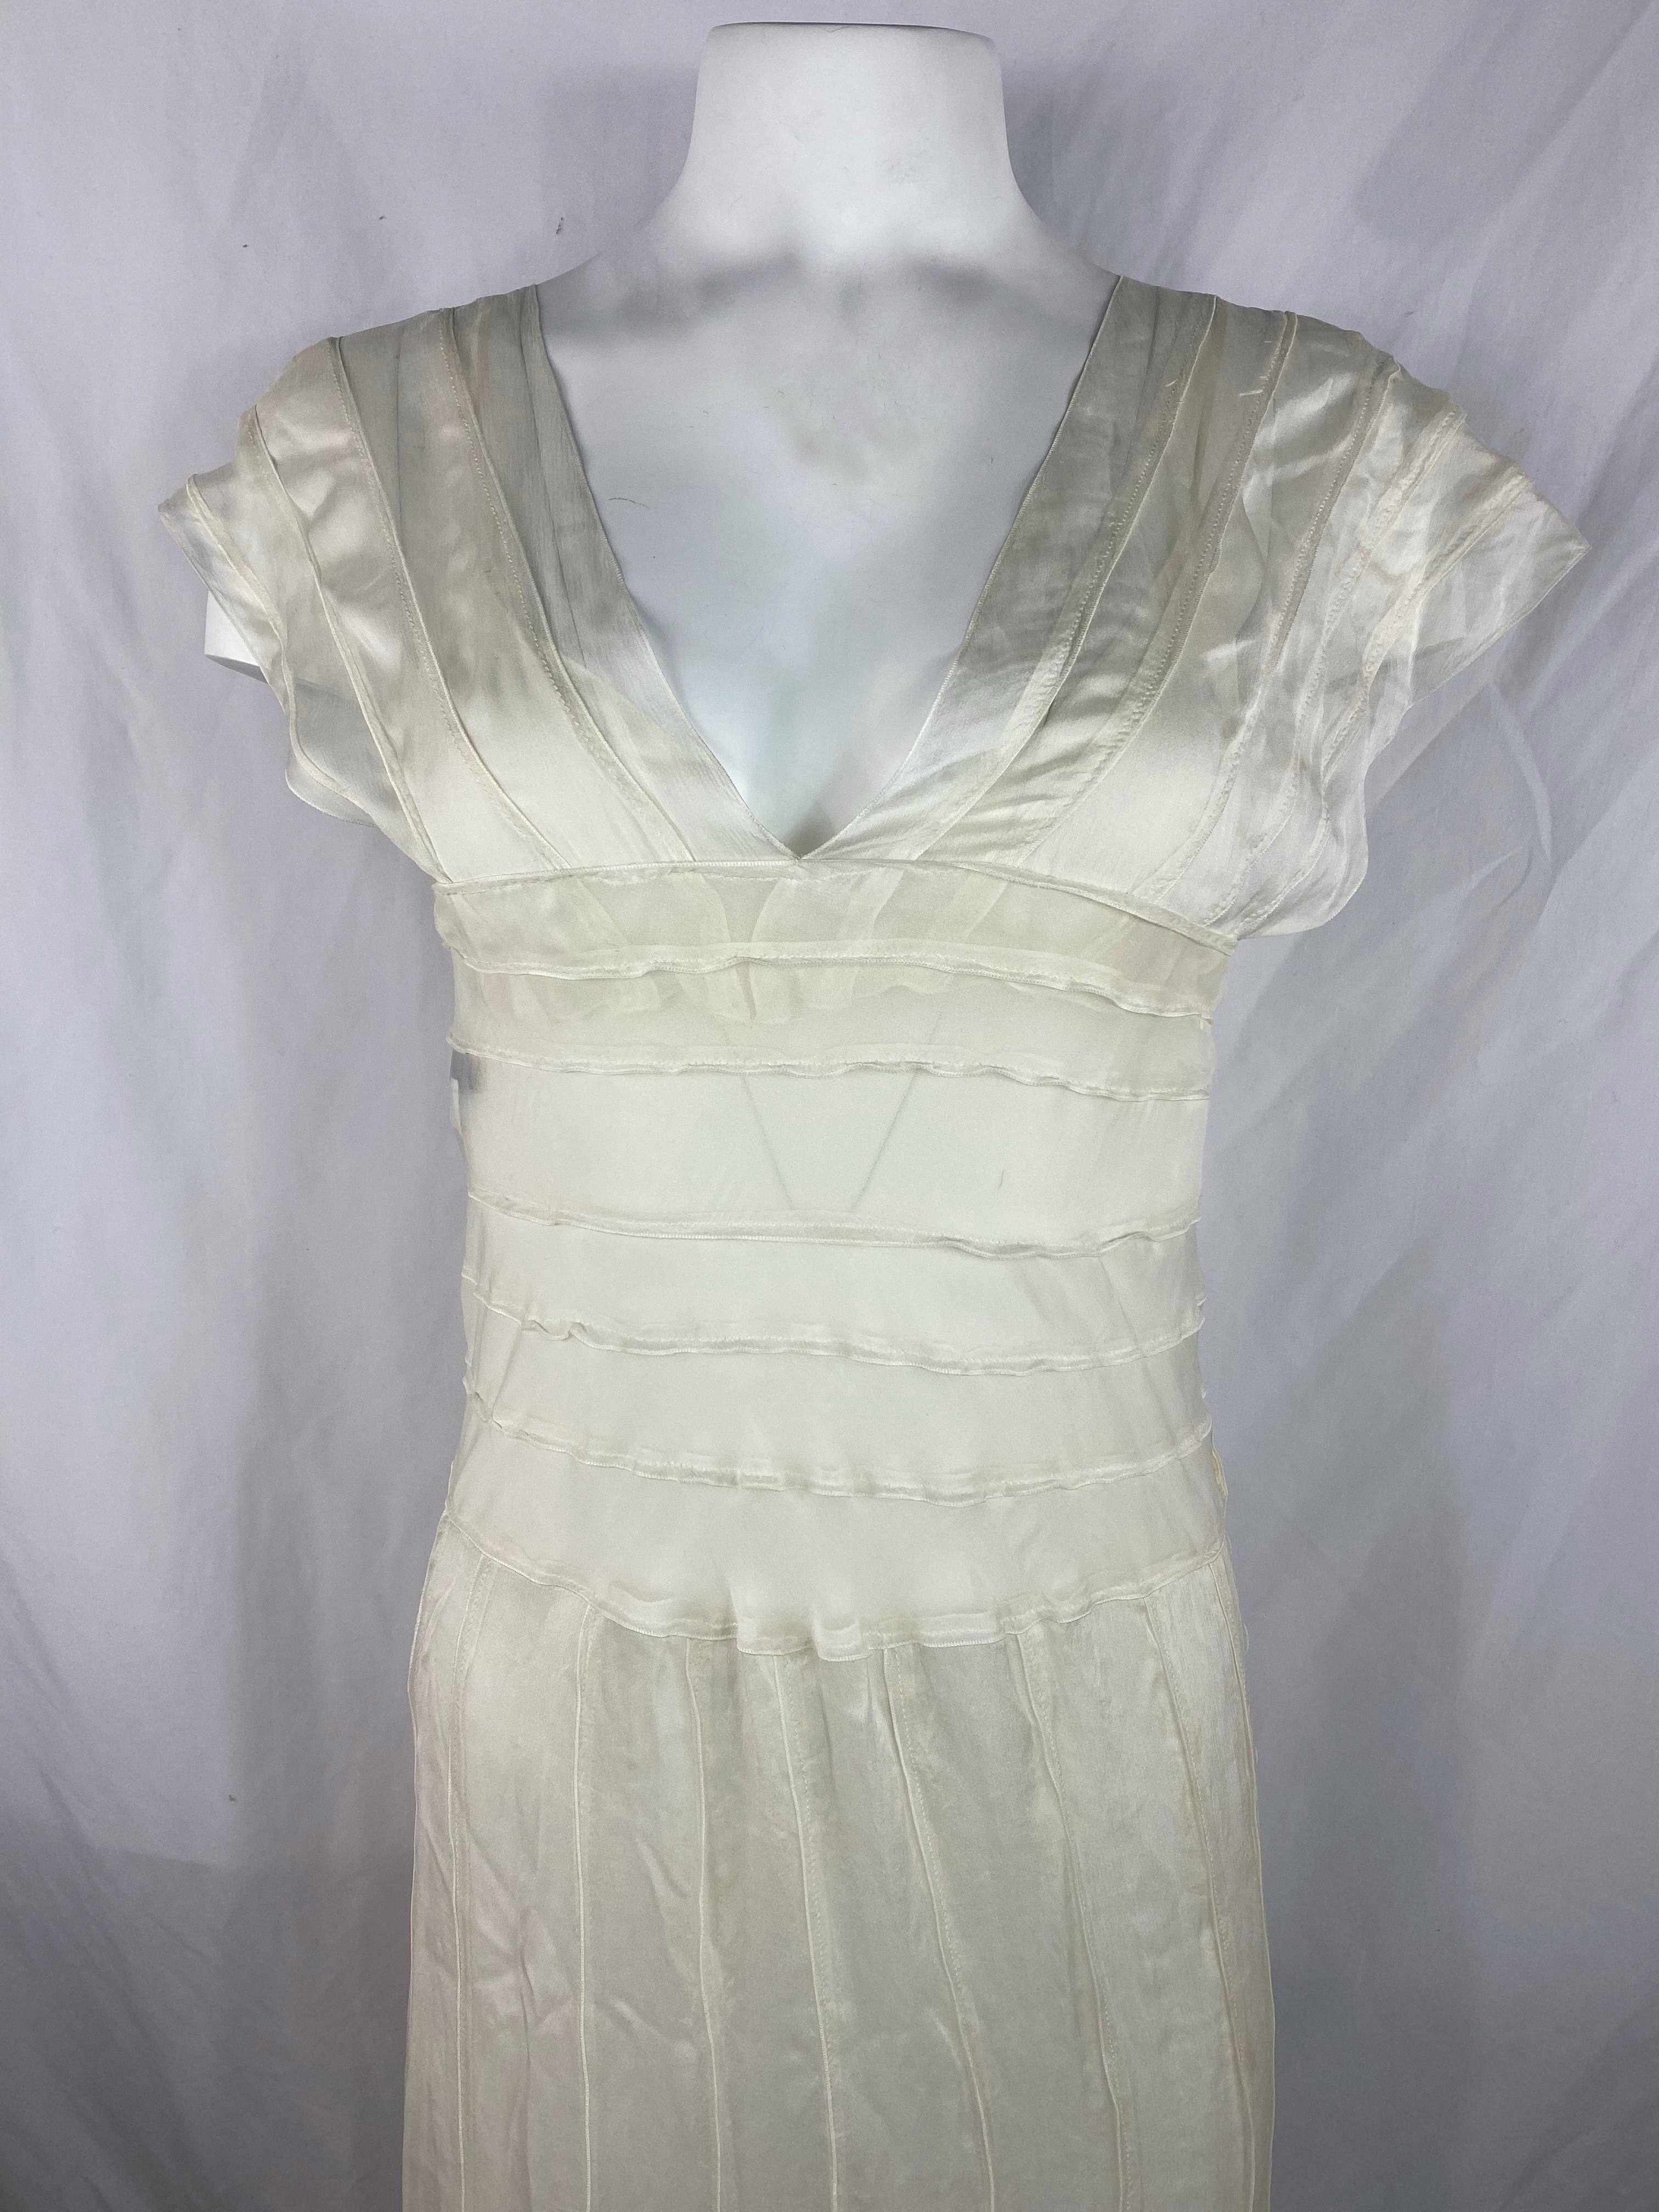 Product details:

The dress is made out of 100% silk, featuring white, cream color with ruffled design detail, v- neck line, short sleeves, floor length and side button closure.